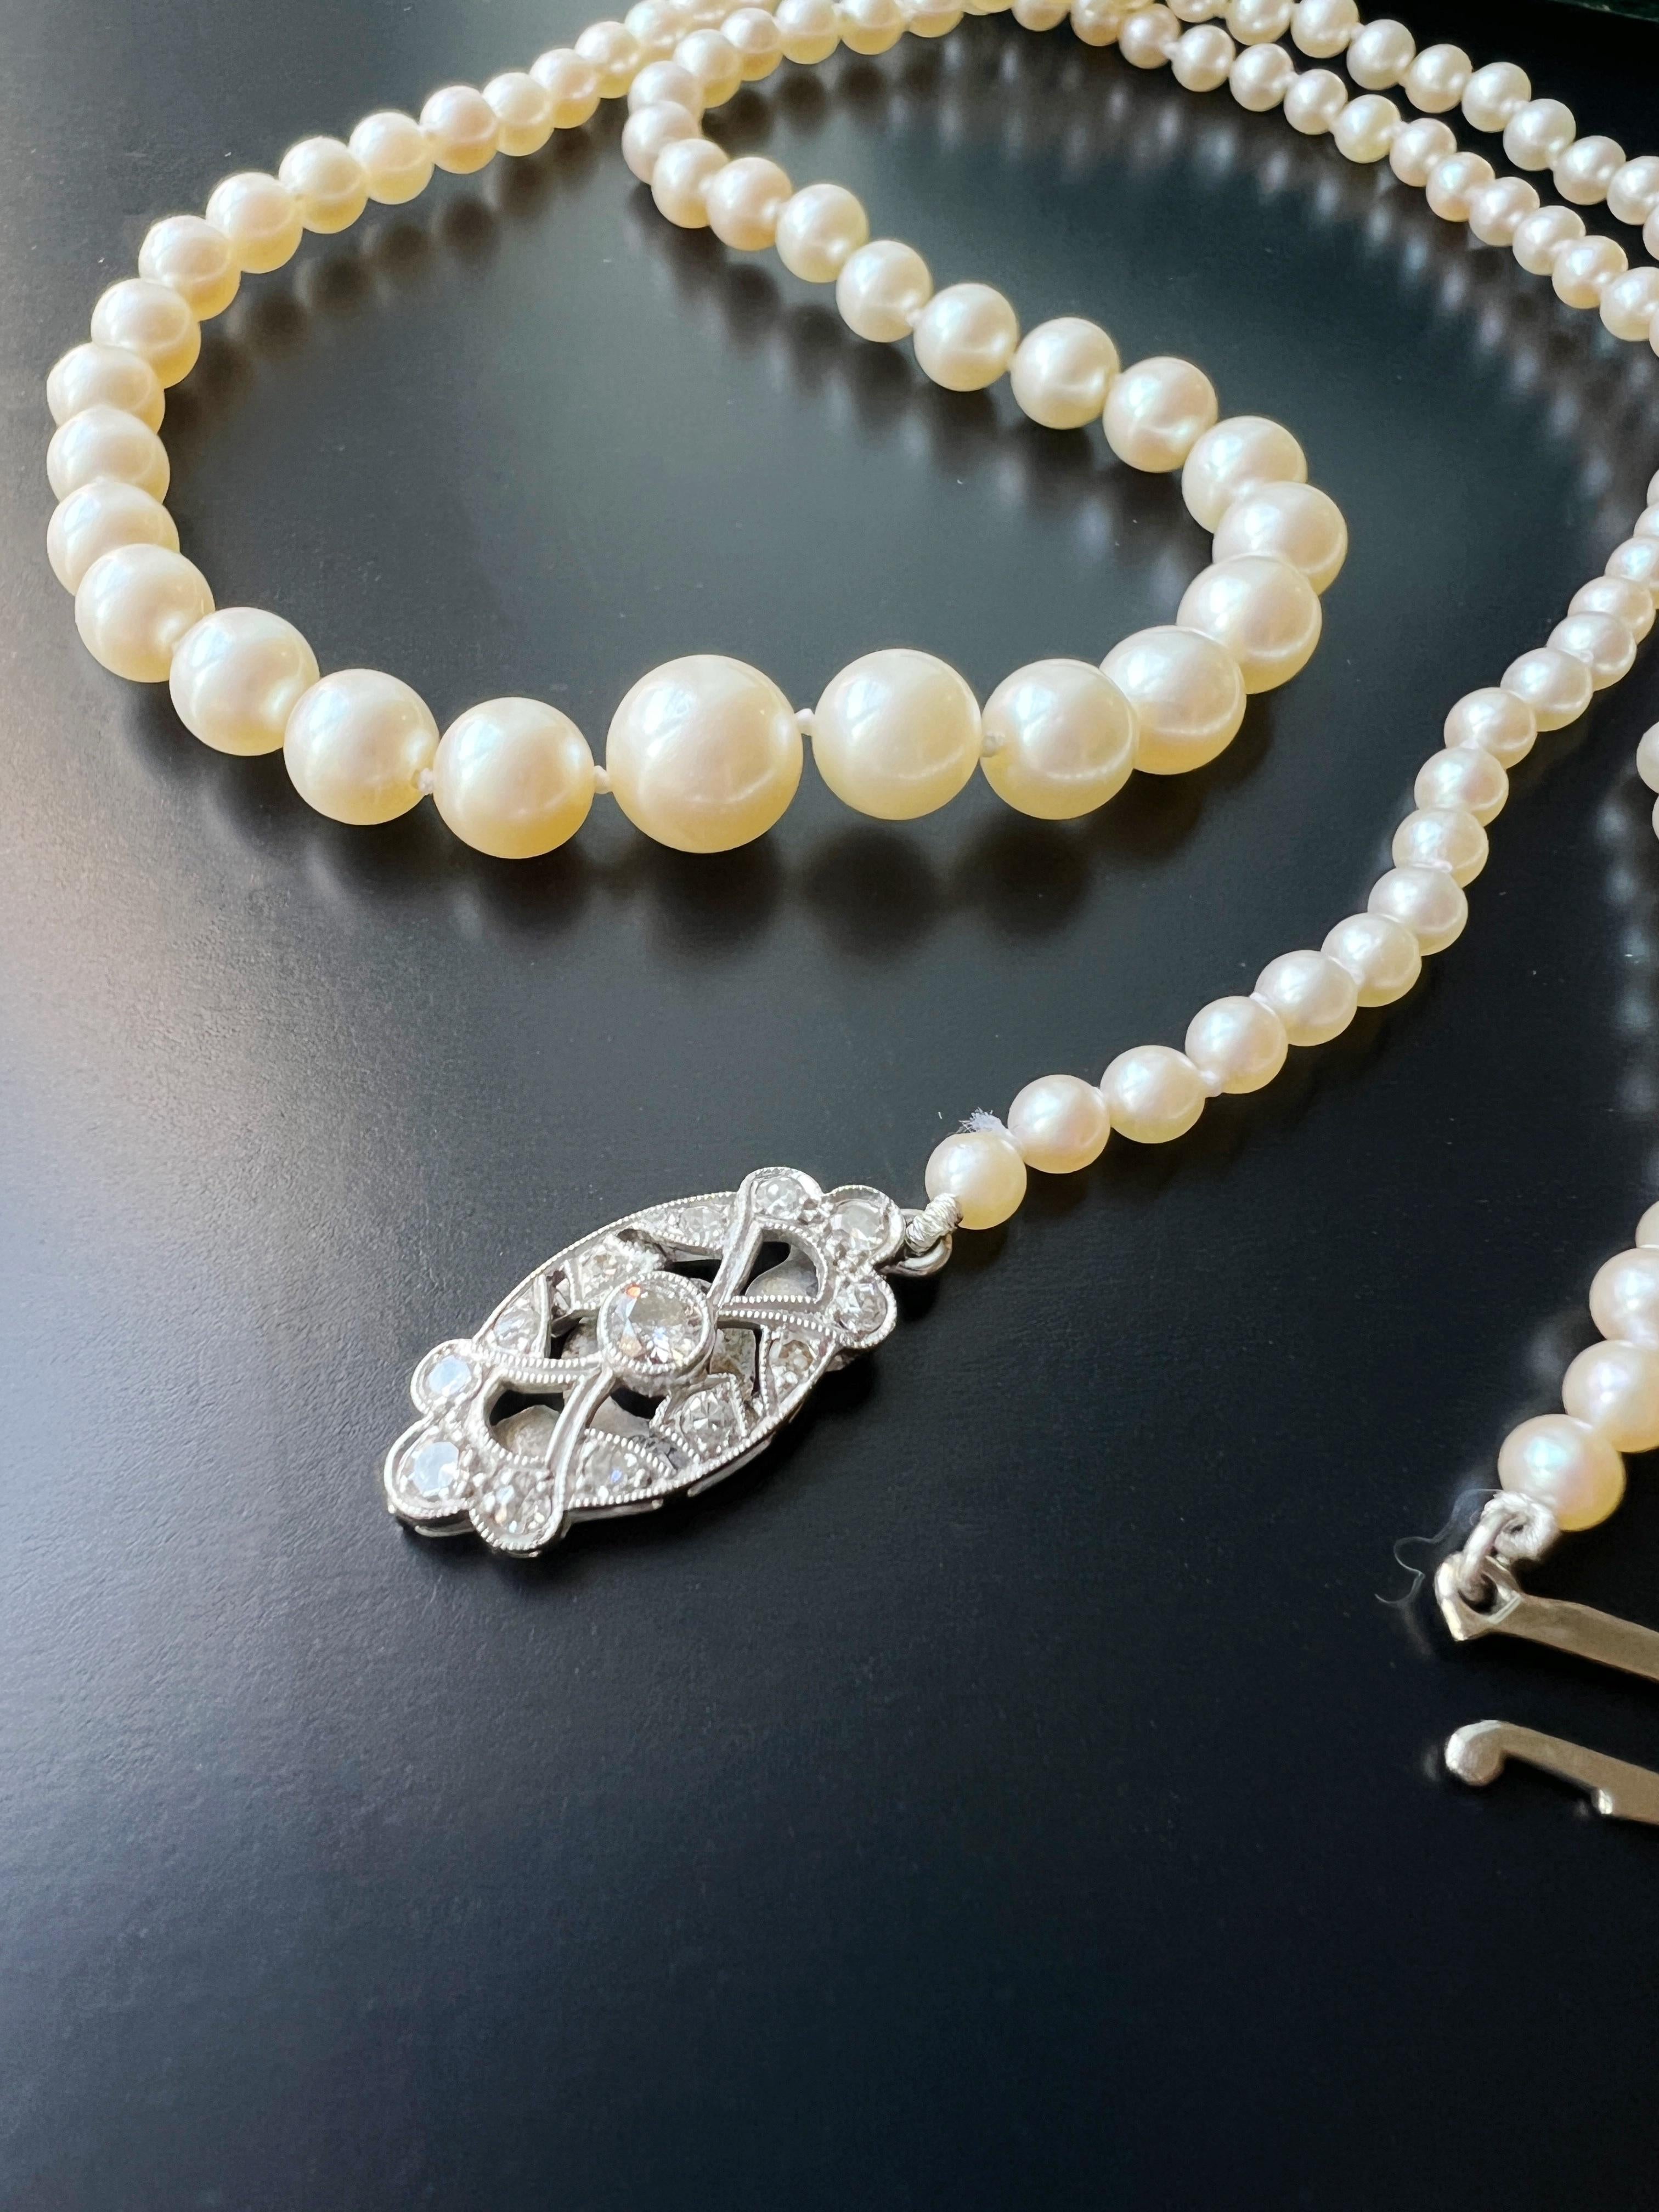 Known as the “Queen of Gems”, pearls have been coveted for centuries.

For sale a timeless single strand Akoya salt water pearl necklace, consisting of 121 rounded pearls, dated back to the Art Deco era. The pearls have a white body color and they